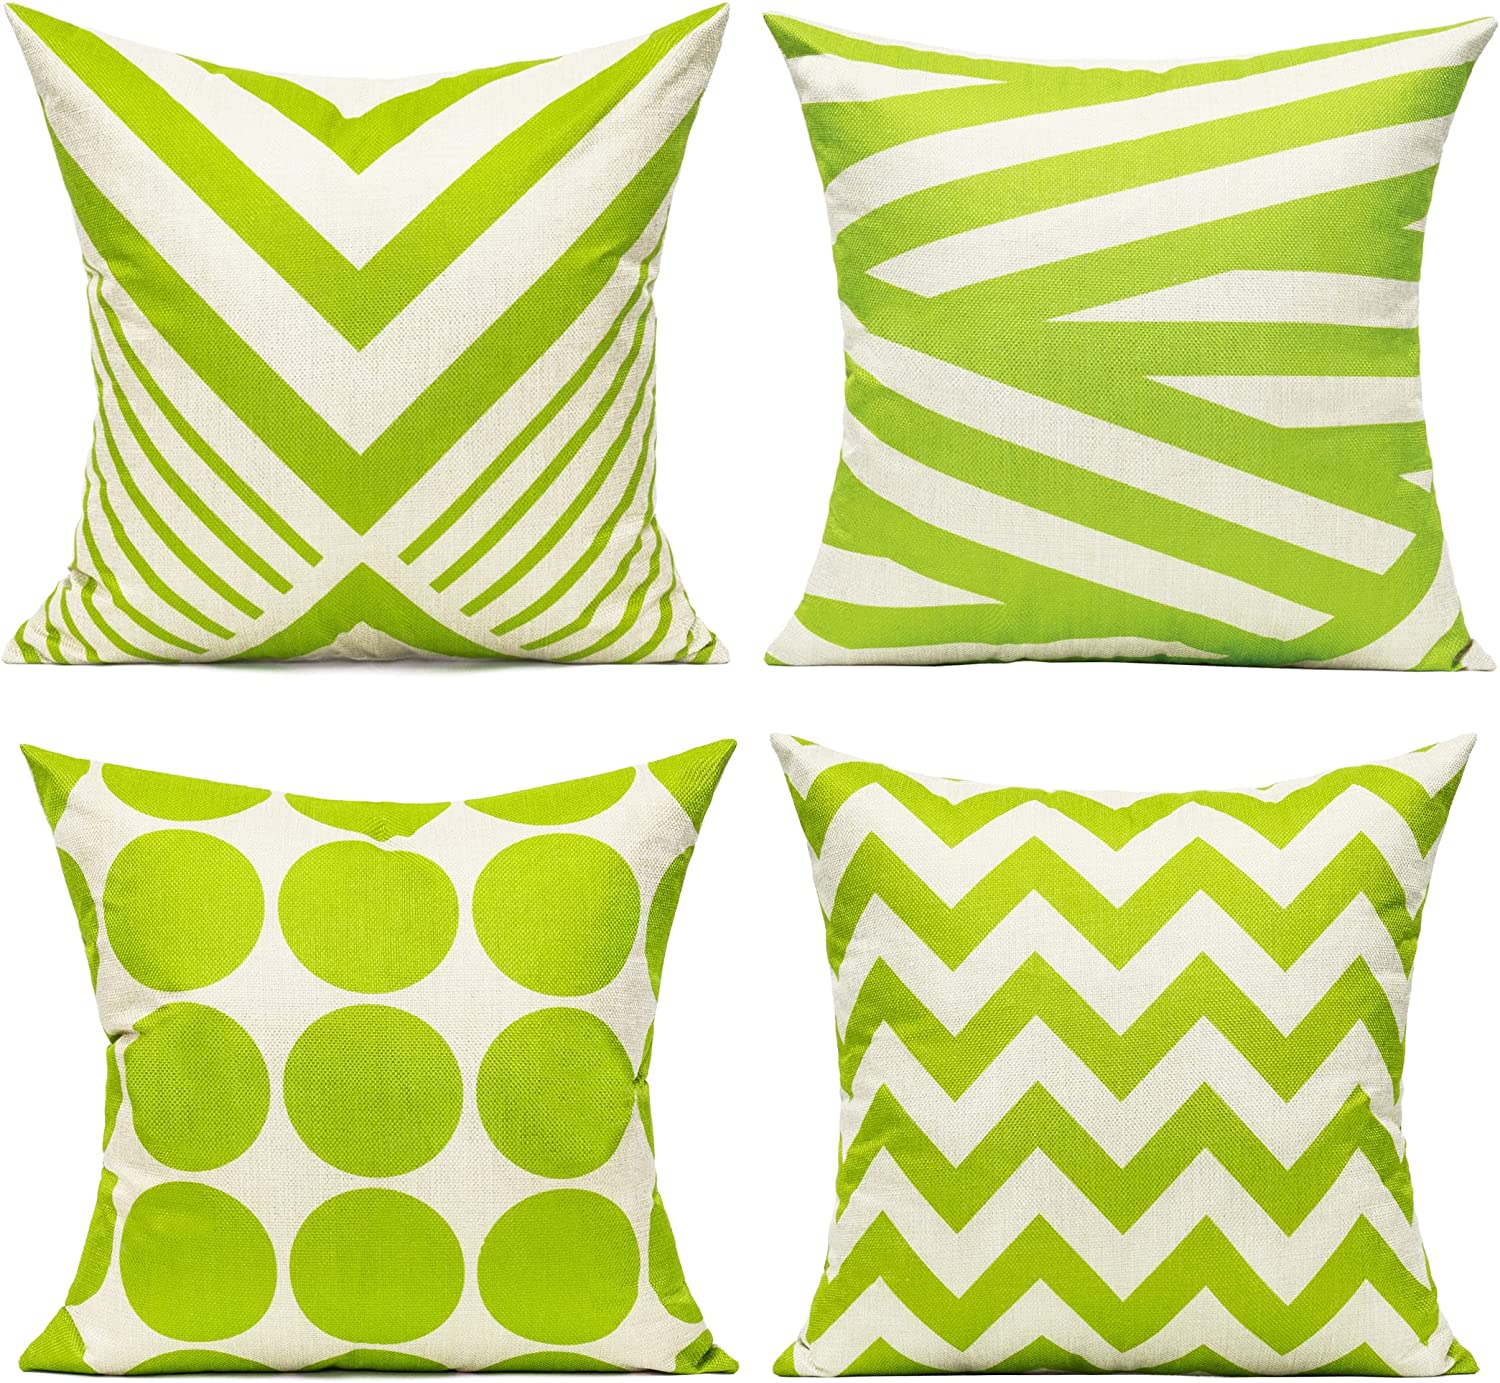 All Smiles Outdoor Patio Pillow Cover Set, 4-Pack